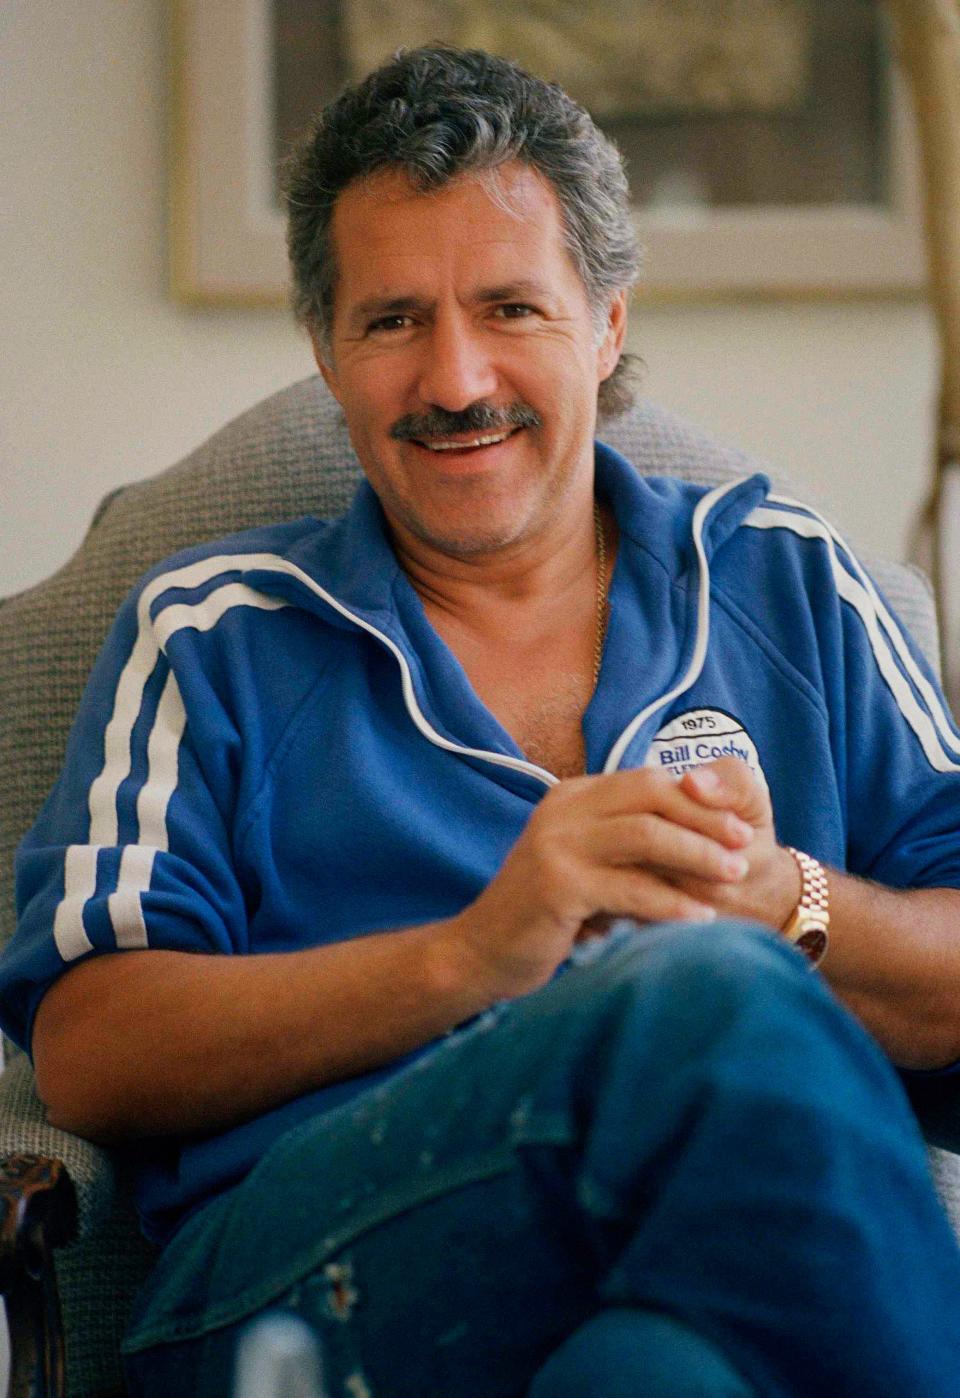 For many years, game show host Alex Trebek, seen here in 1988, sported a signature mustache.